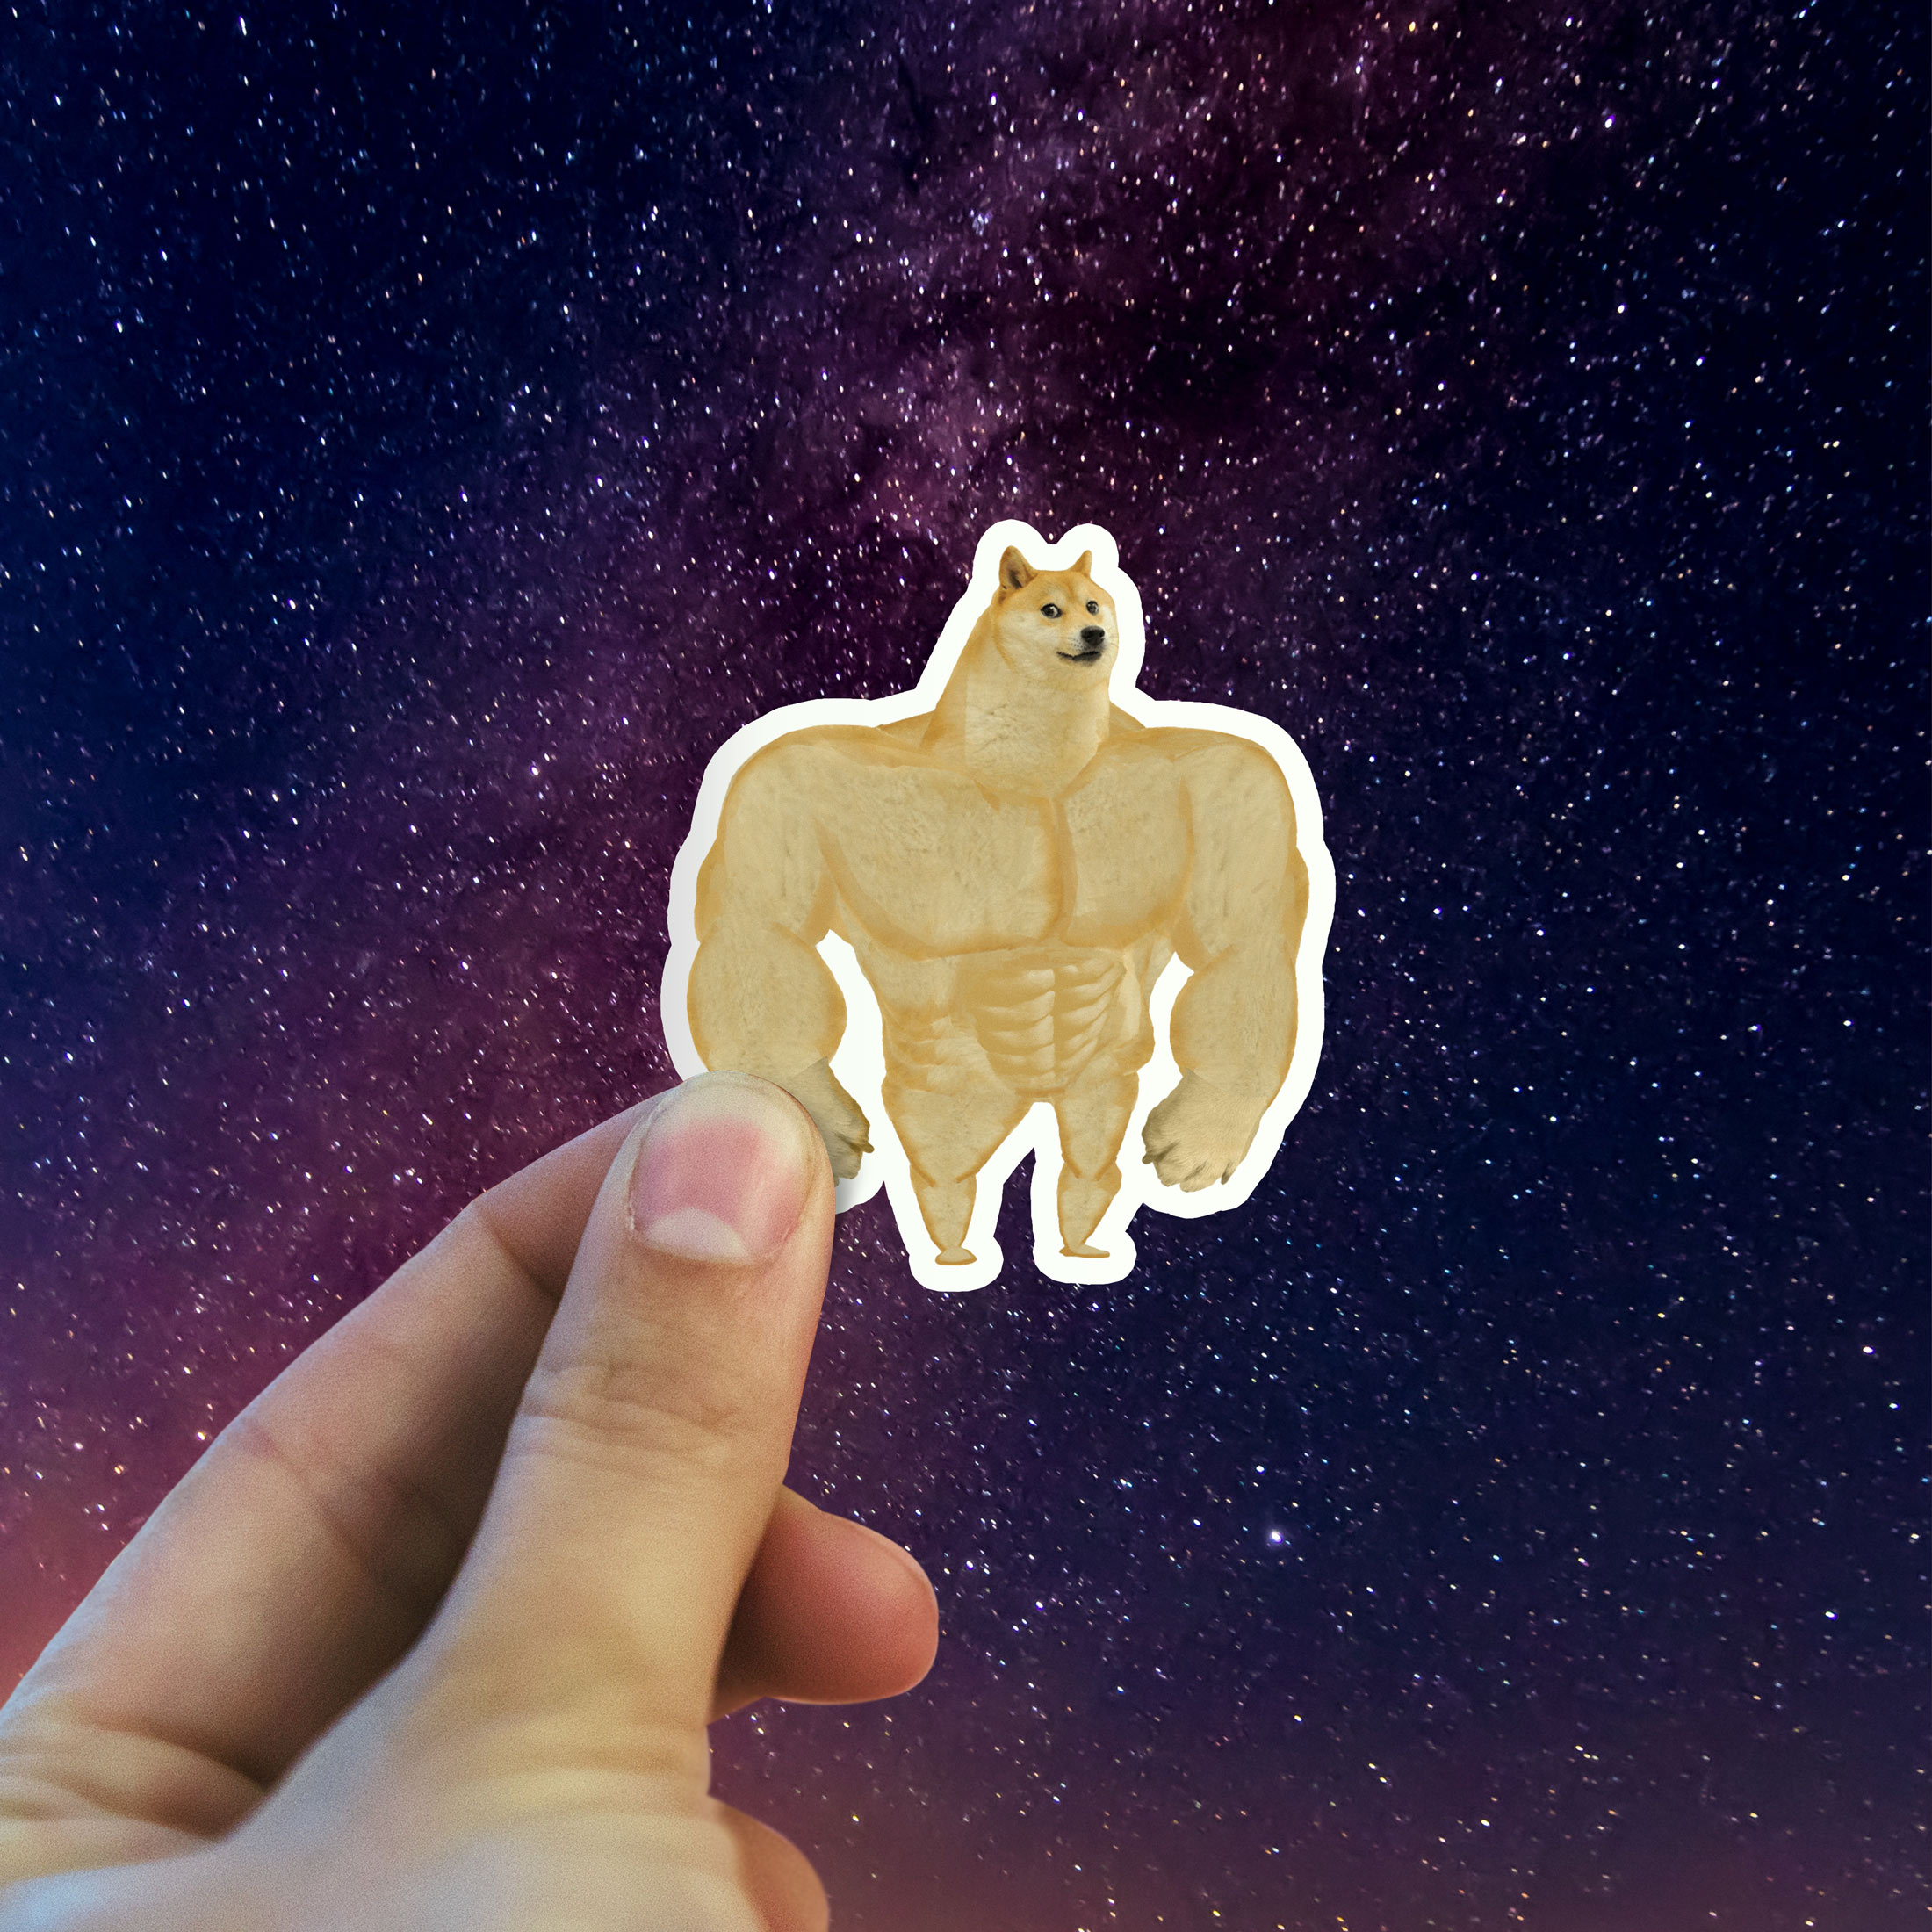 Dogecoin Swole sticker holding in hand